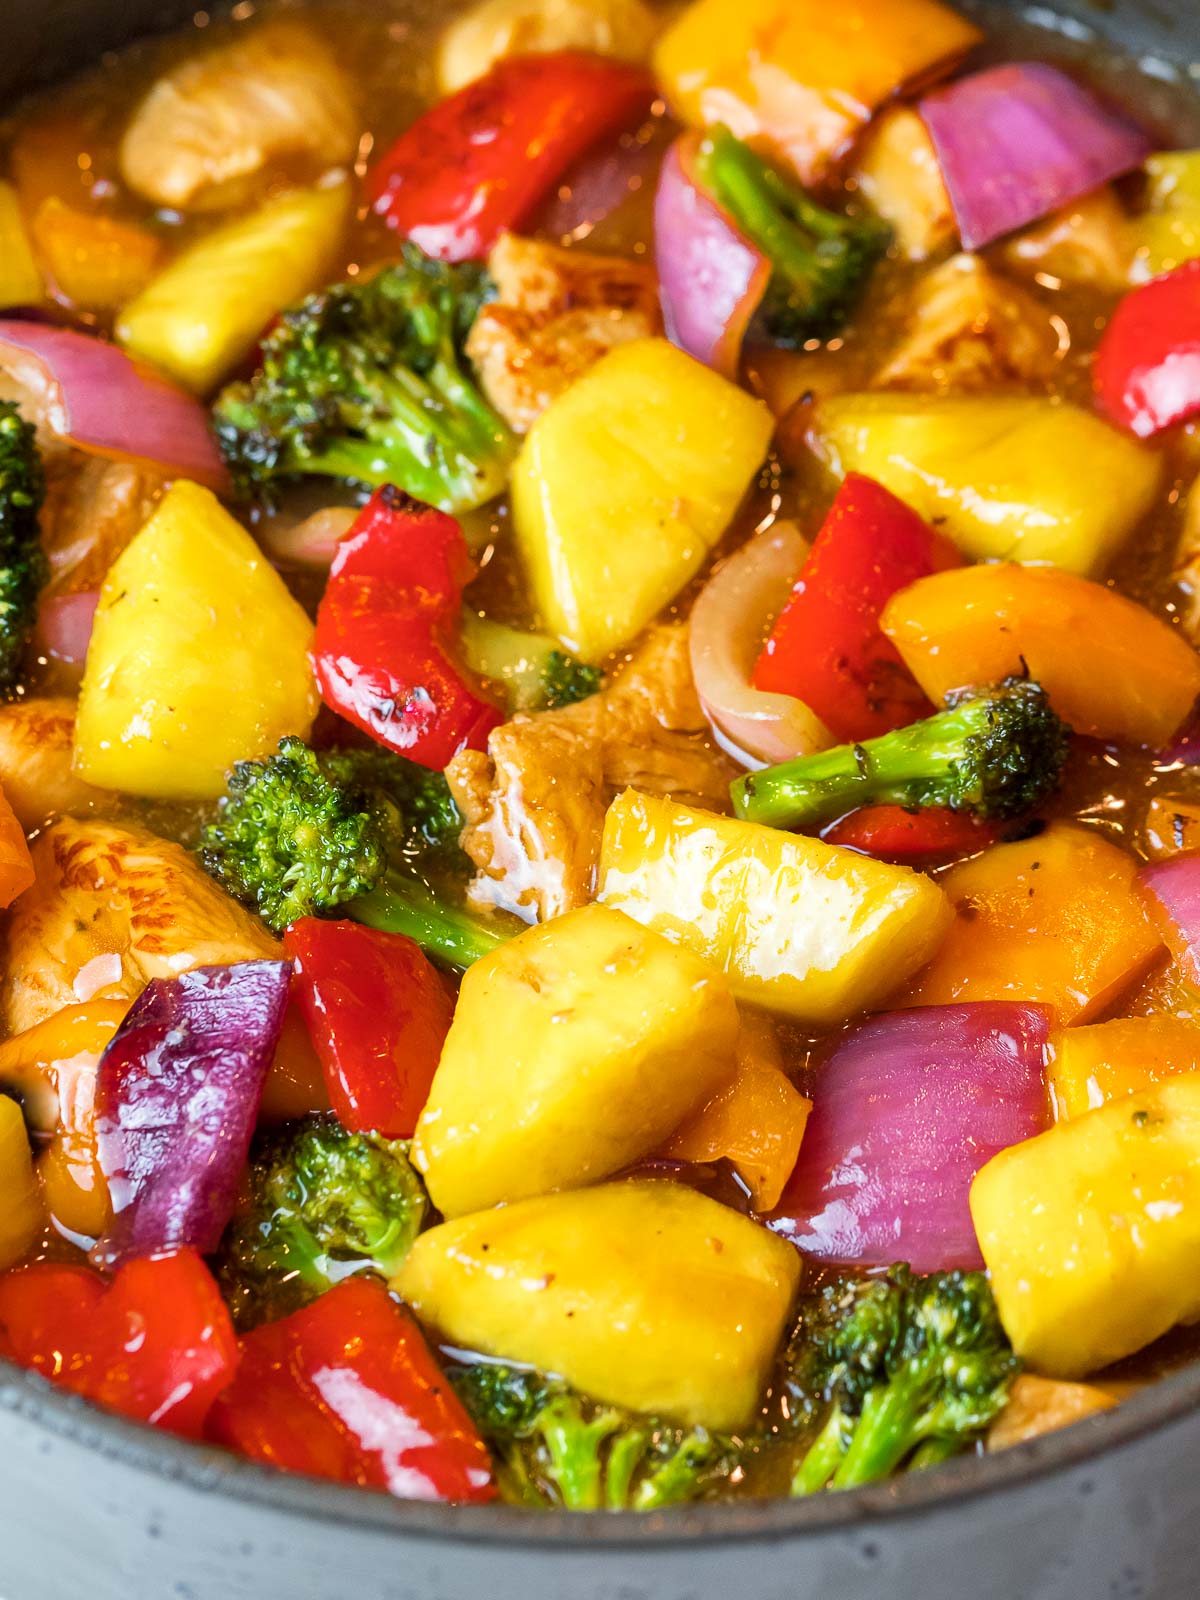 Hawaiian pineapple chicken stir fry with red peppers and broccoli